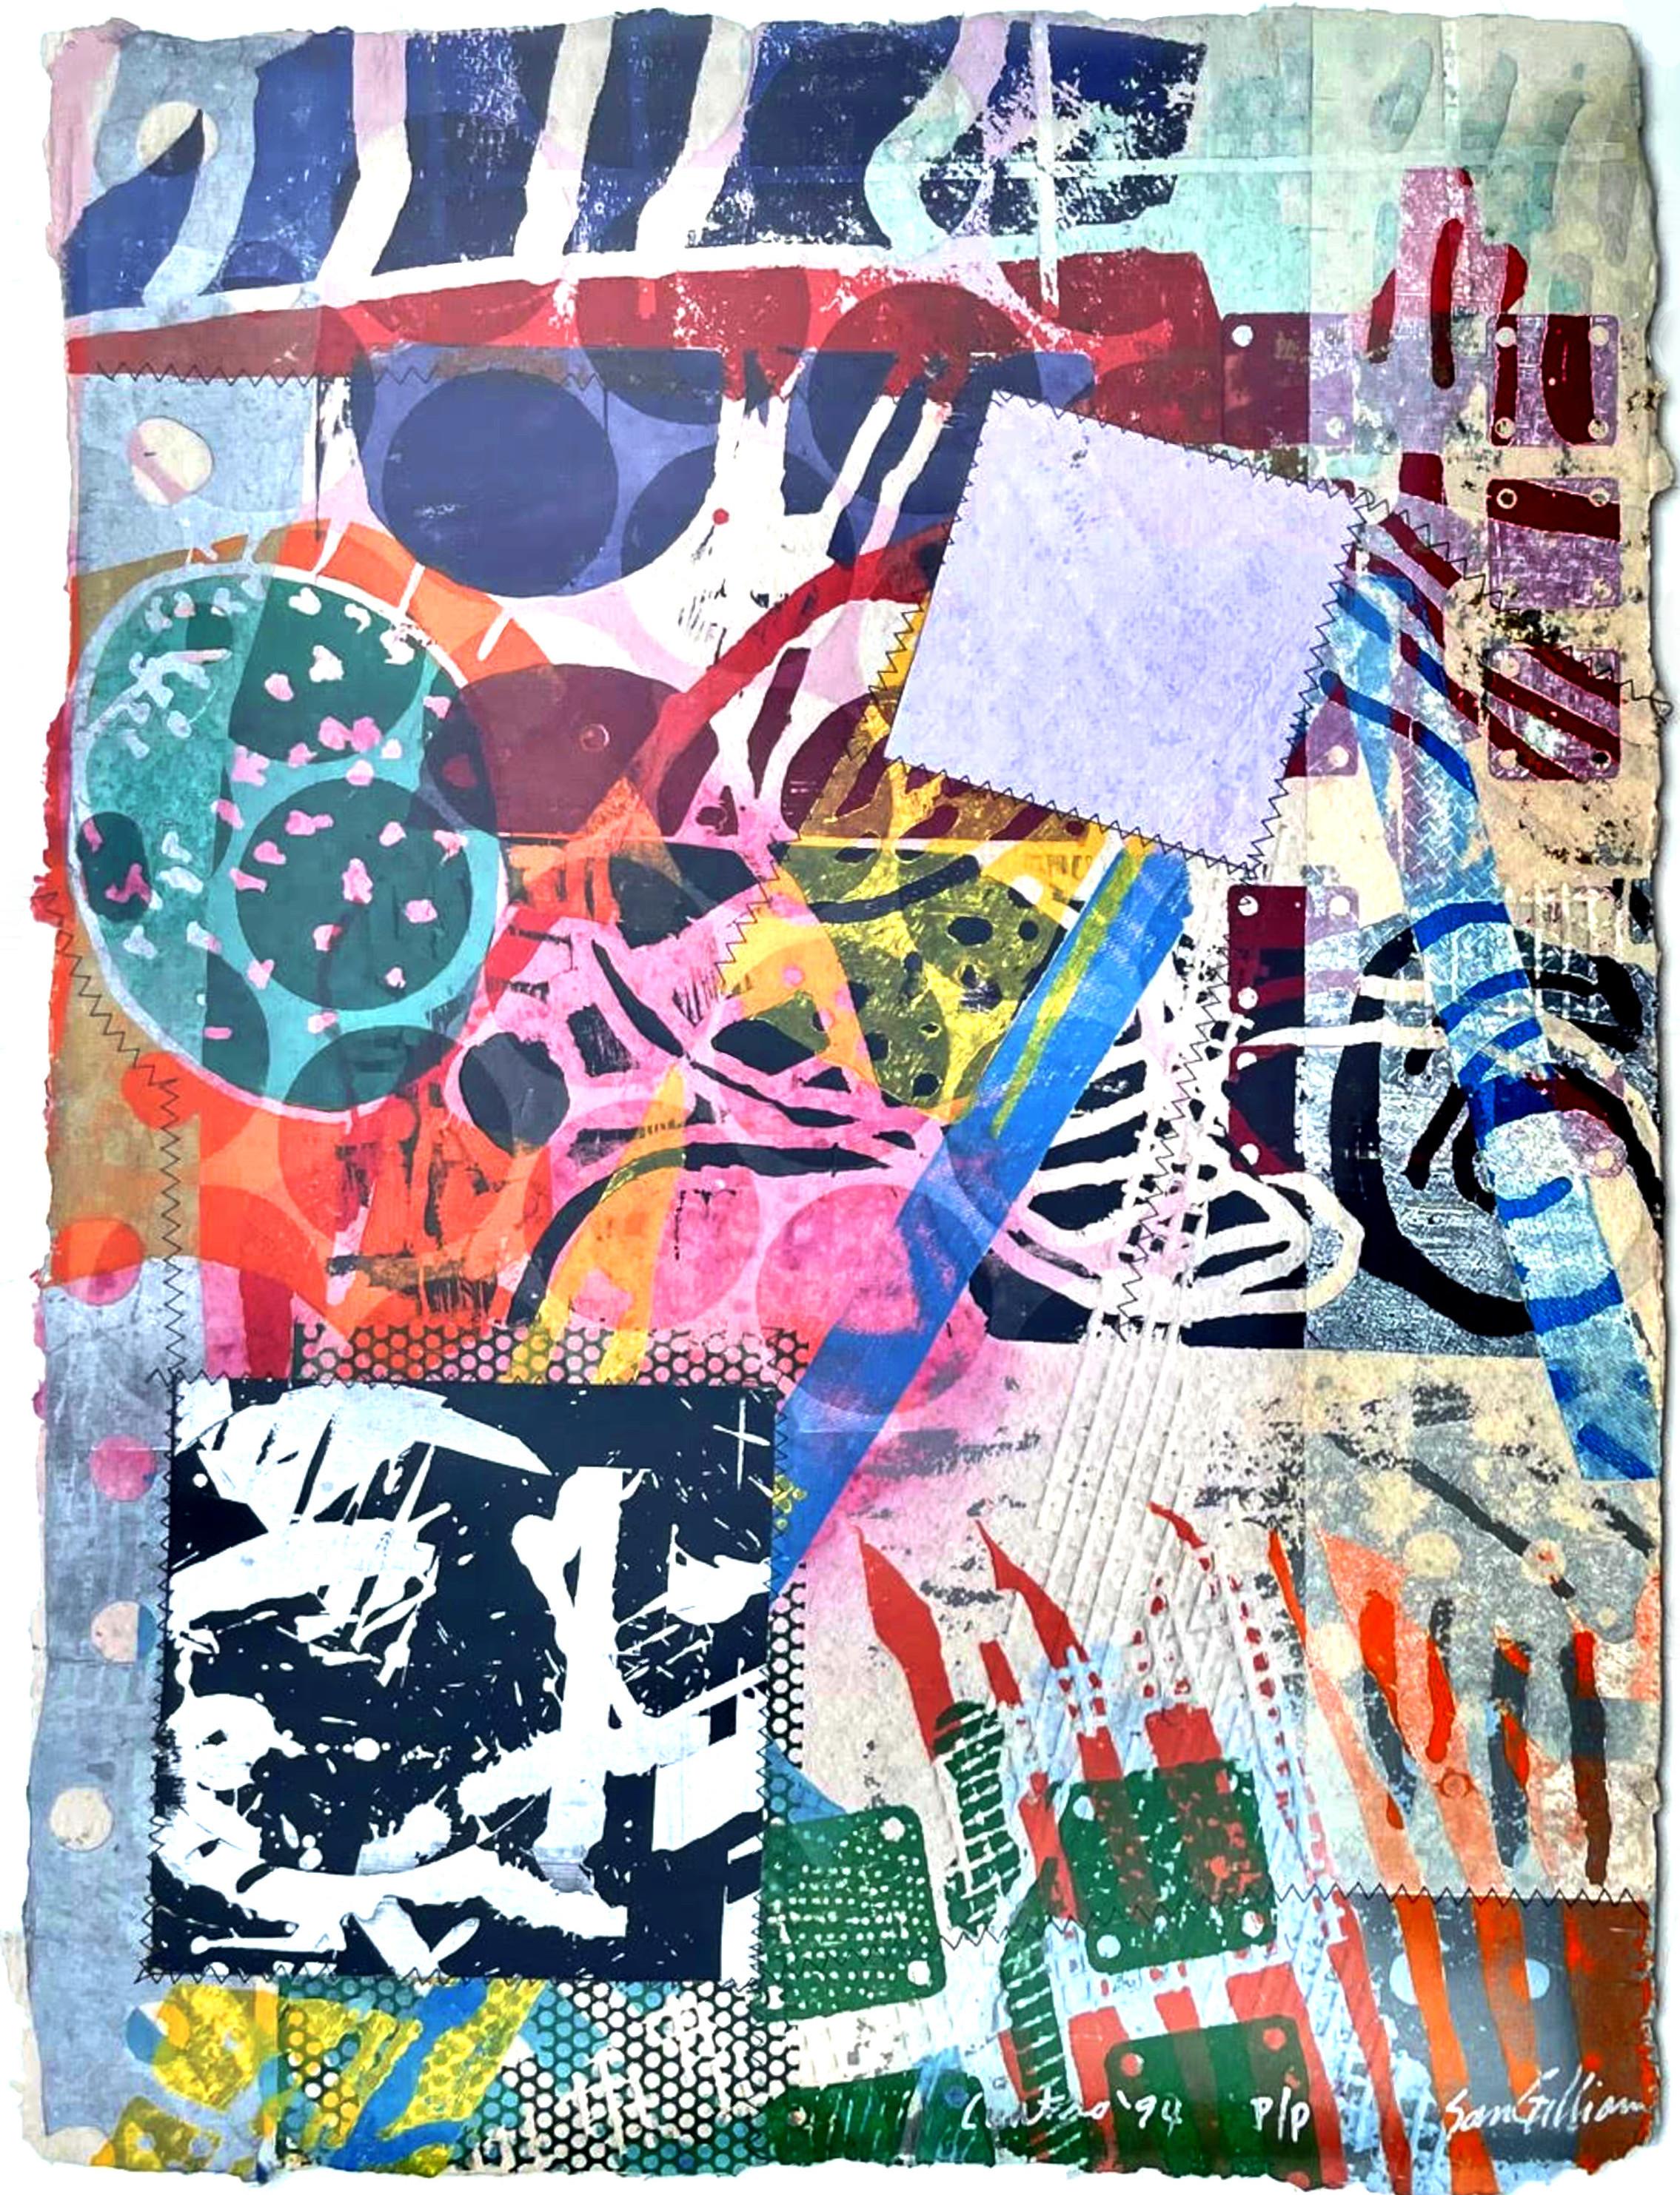 Cuatro (Monoprint with screenprint, collage, acrylic, stitching and embossing) - Abstract Expressionist Mixed Media Art by Sam Gilliam